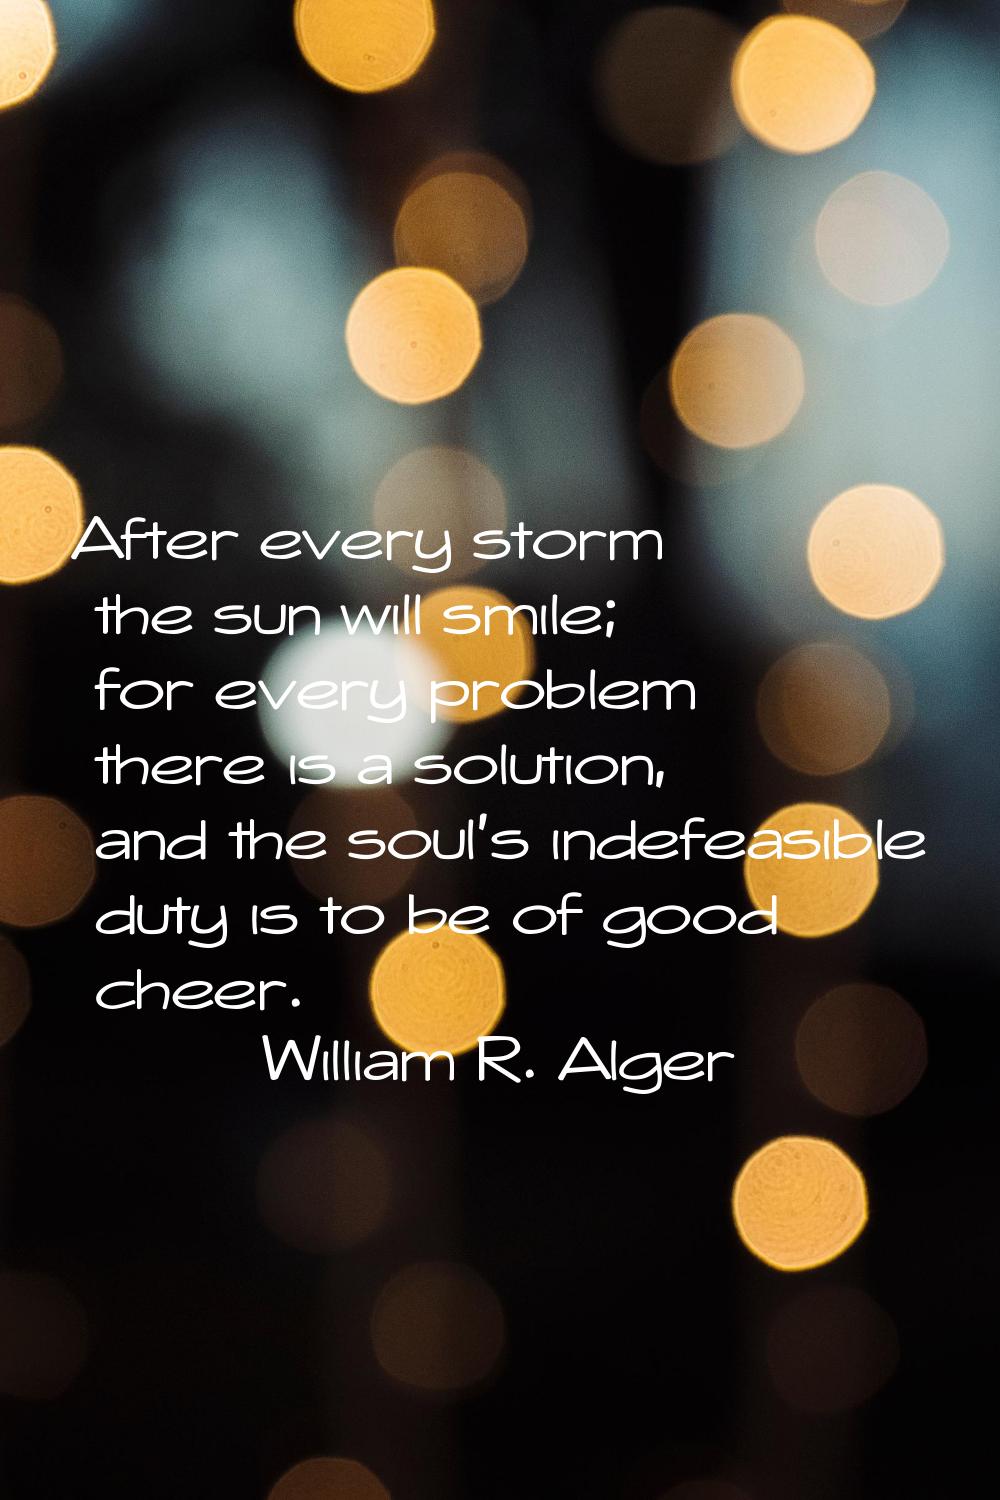 After every storm the sun will smile; for every problem there is a solution, and the soul's indefea